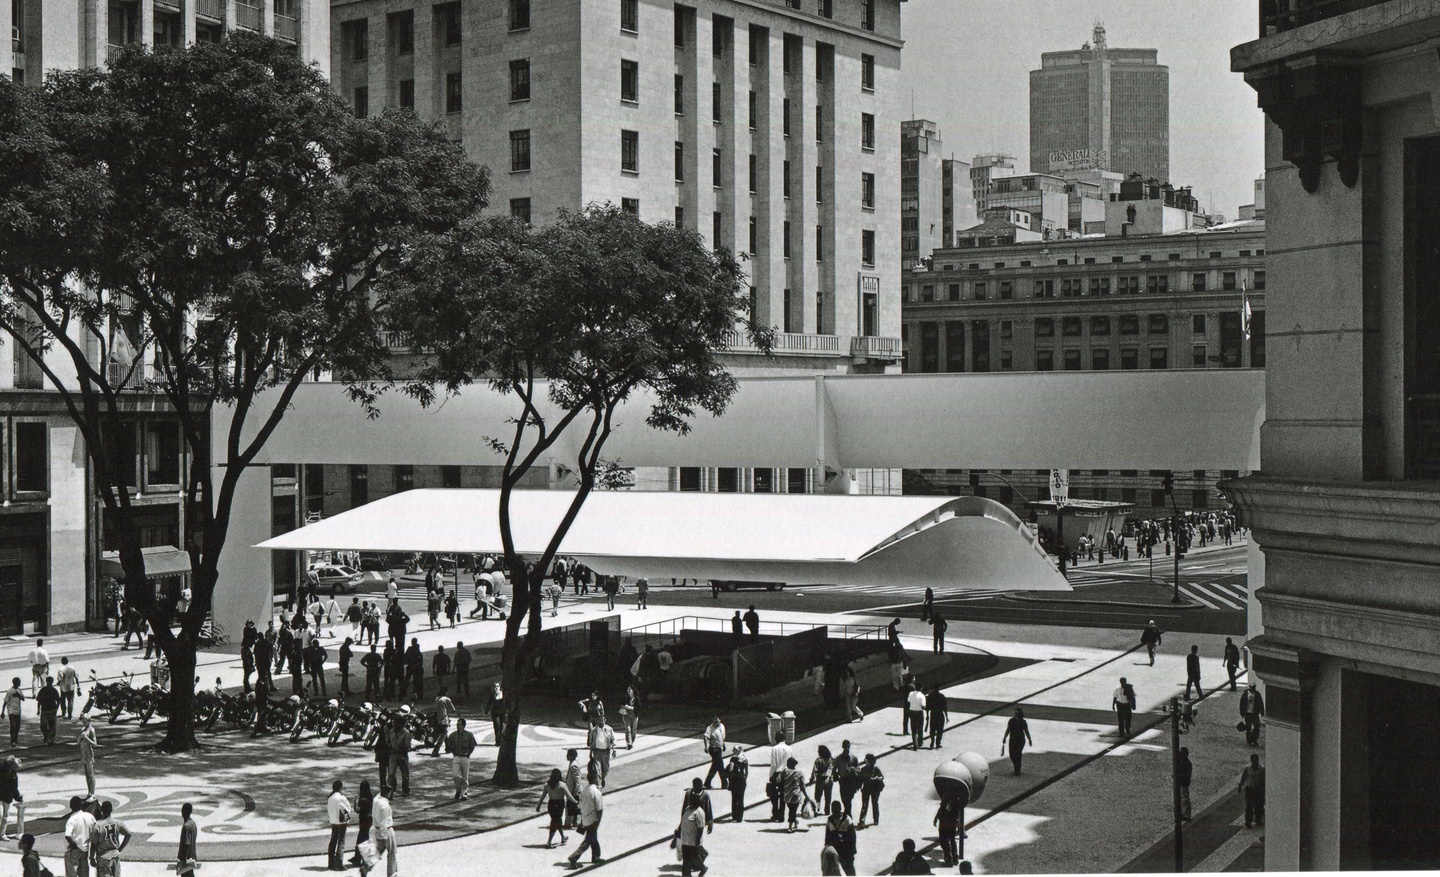 Black-and-white photo of people in a spacious city plaza, with a couple of tall trees and a canopy overhang